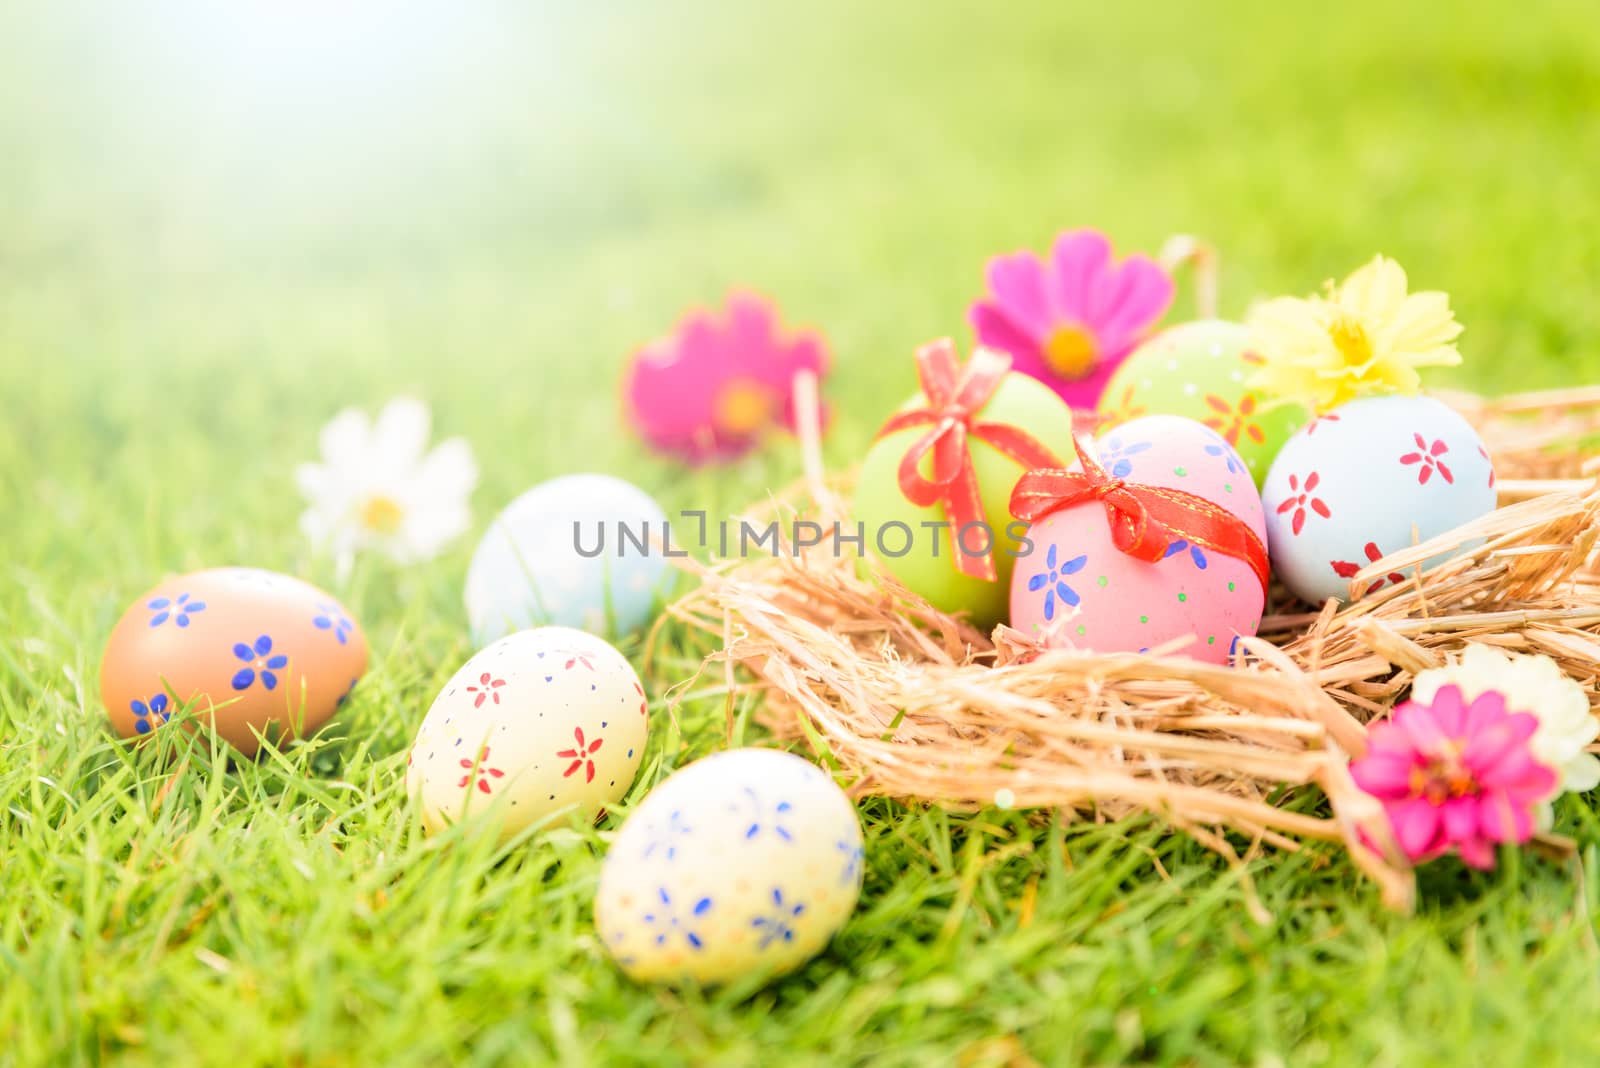 Happy easter!  Closeup Colorful Easter eggs in nest on green gra by spukkato